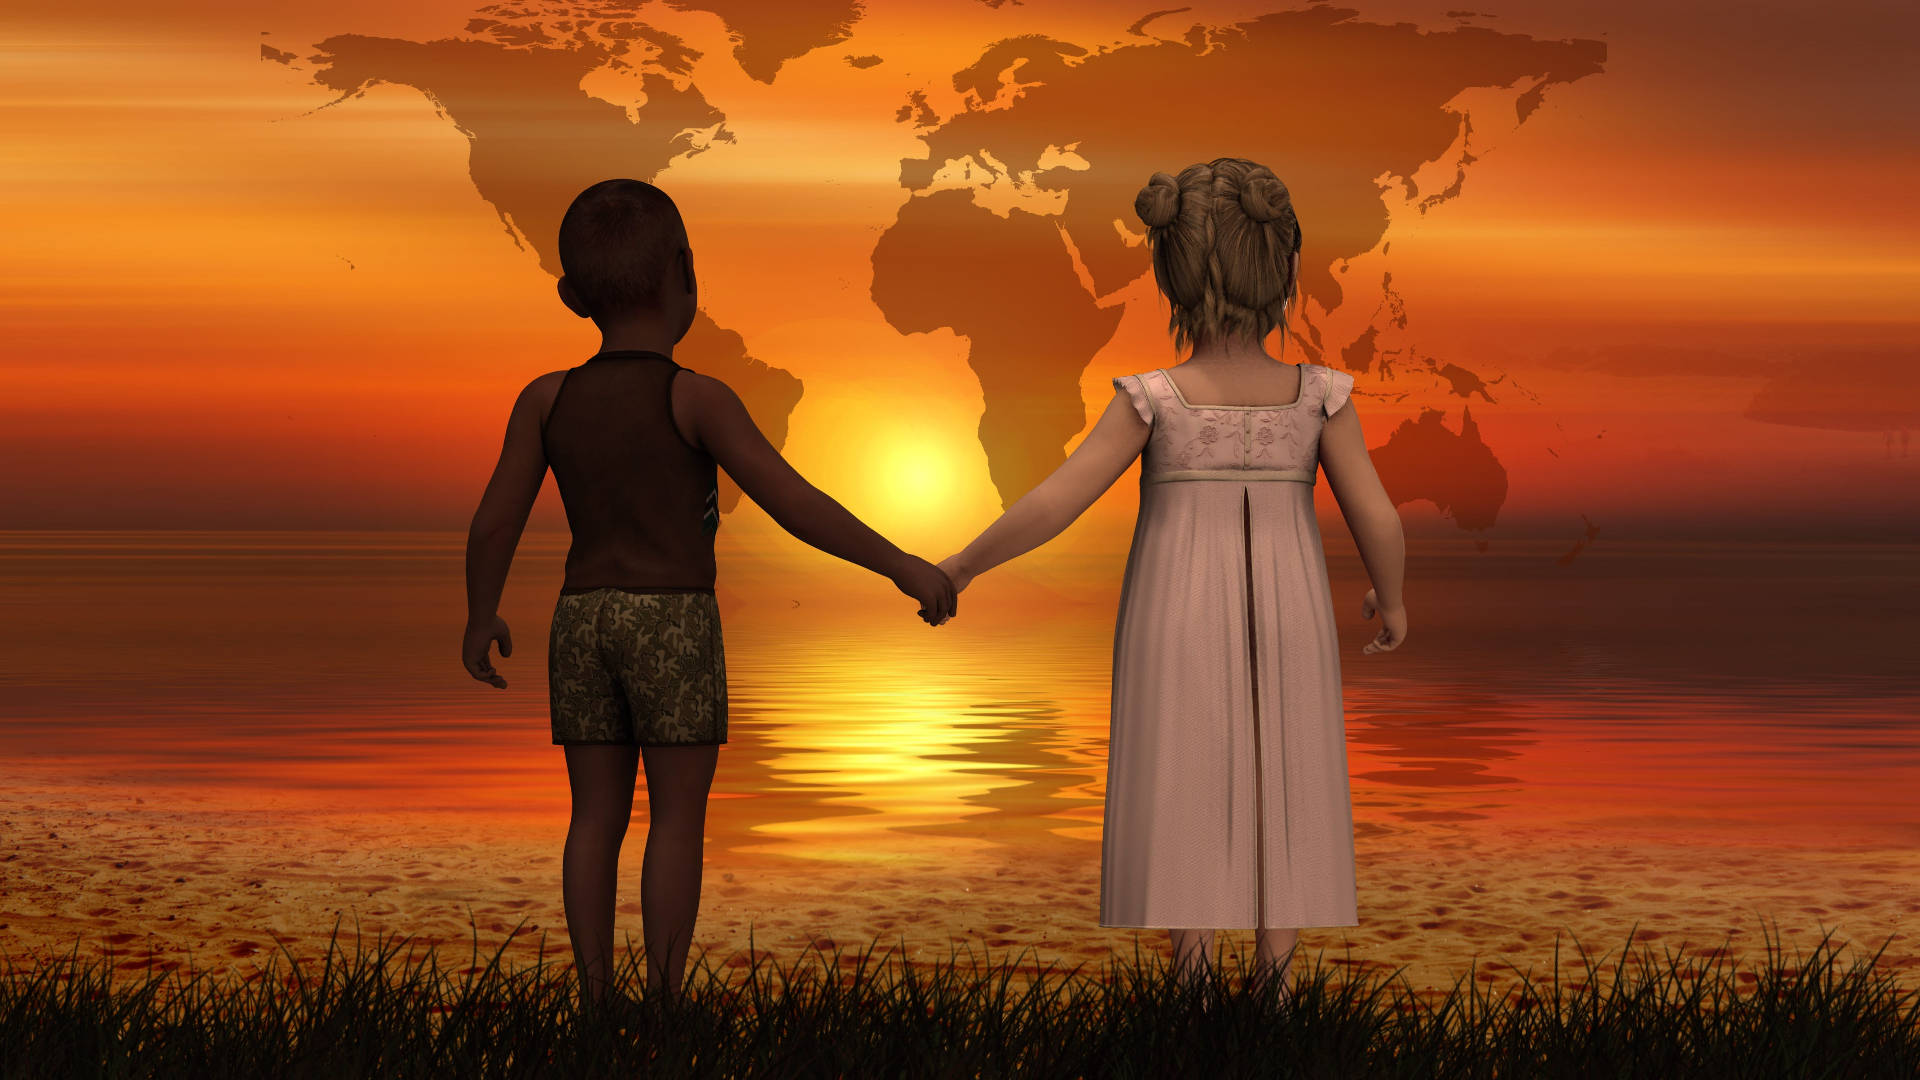 Children Holding Hands For World Peace Background